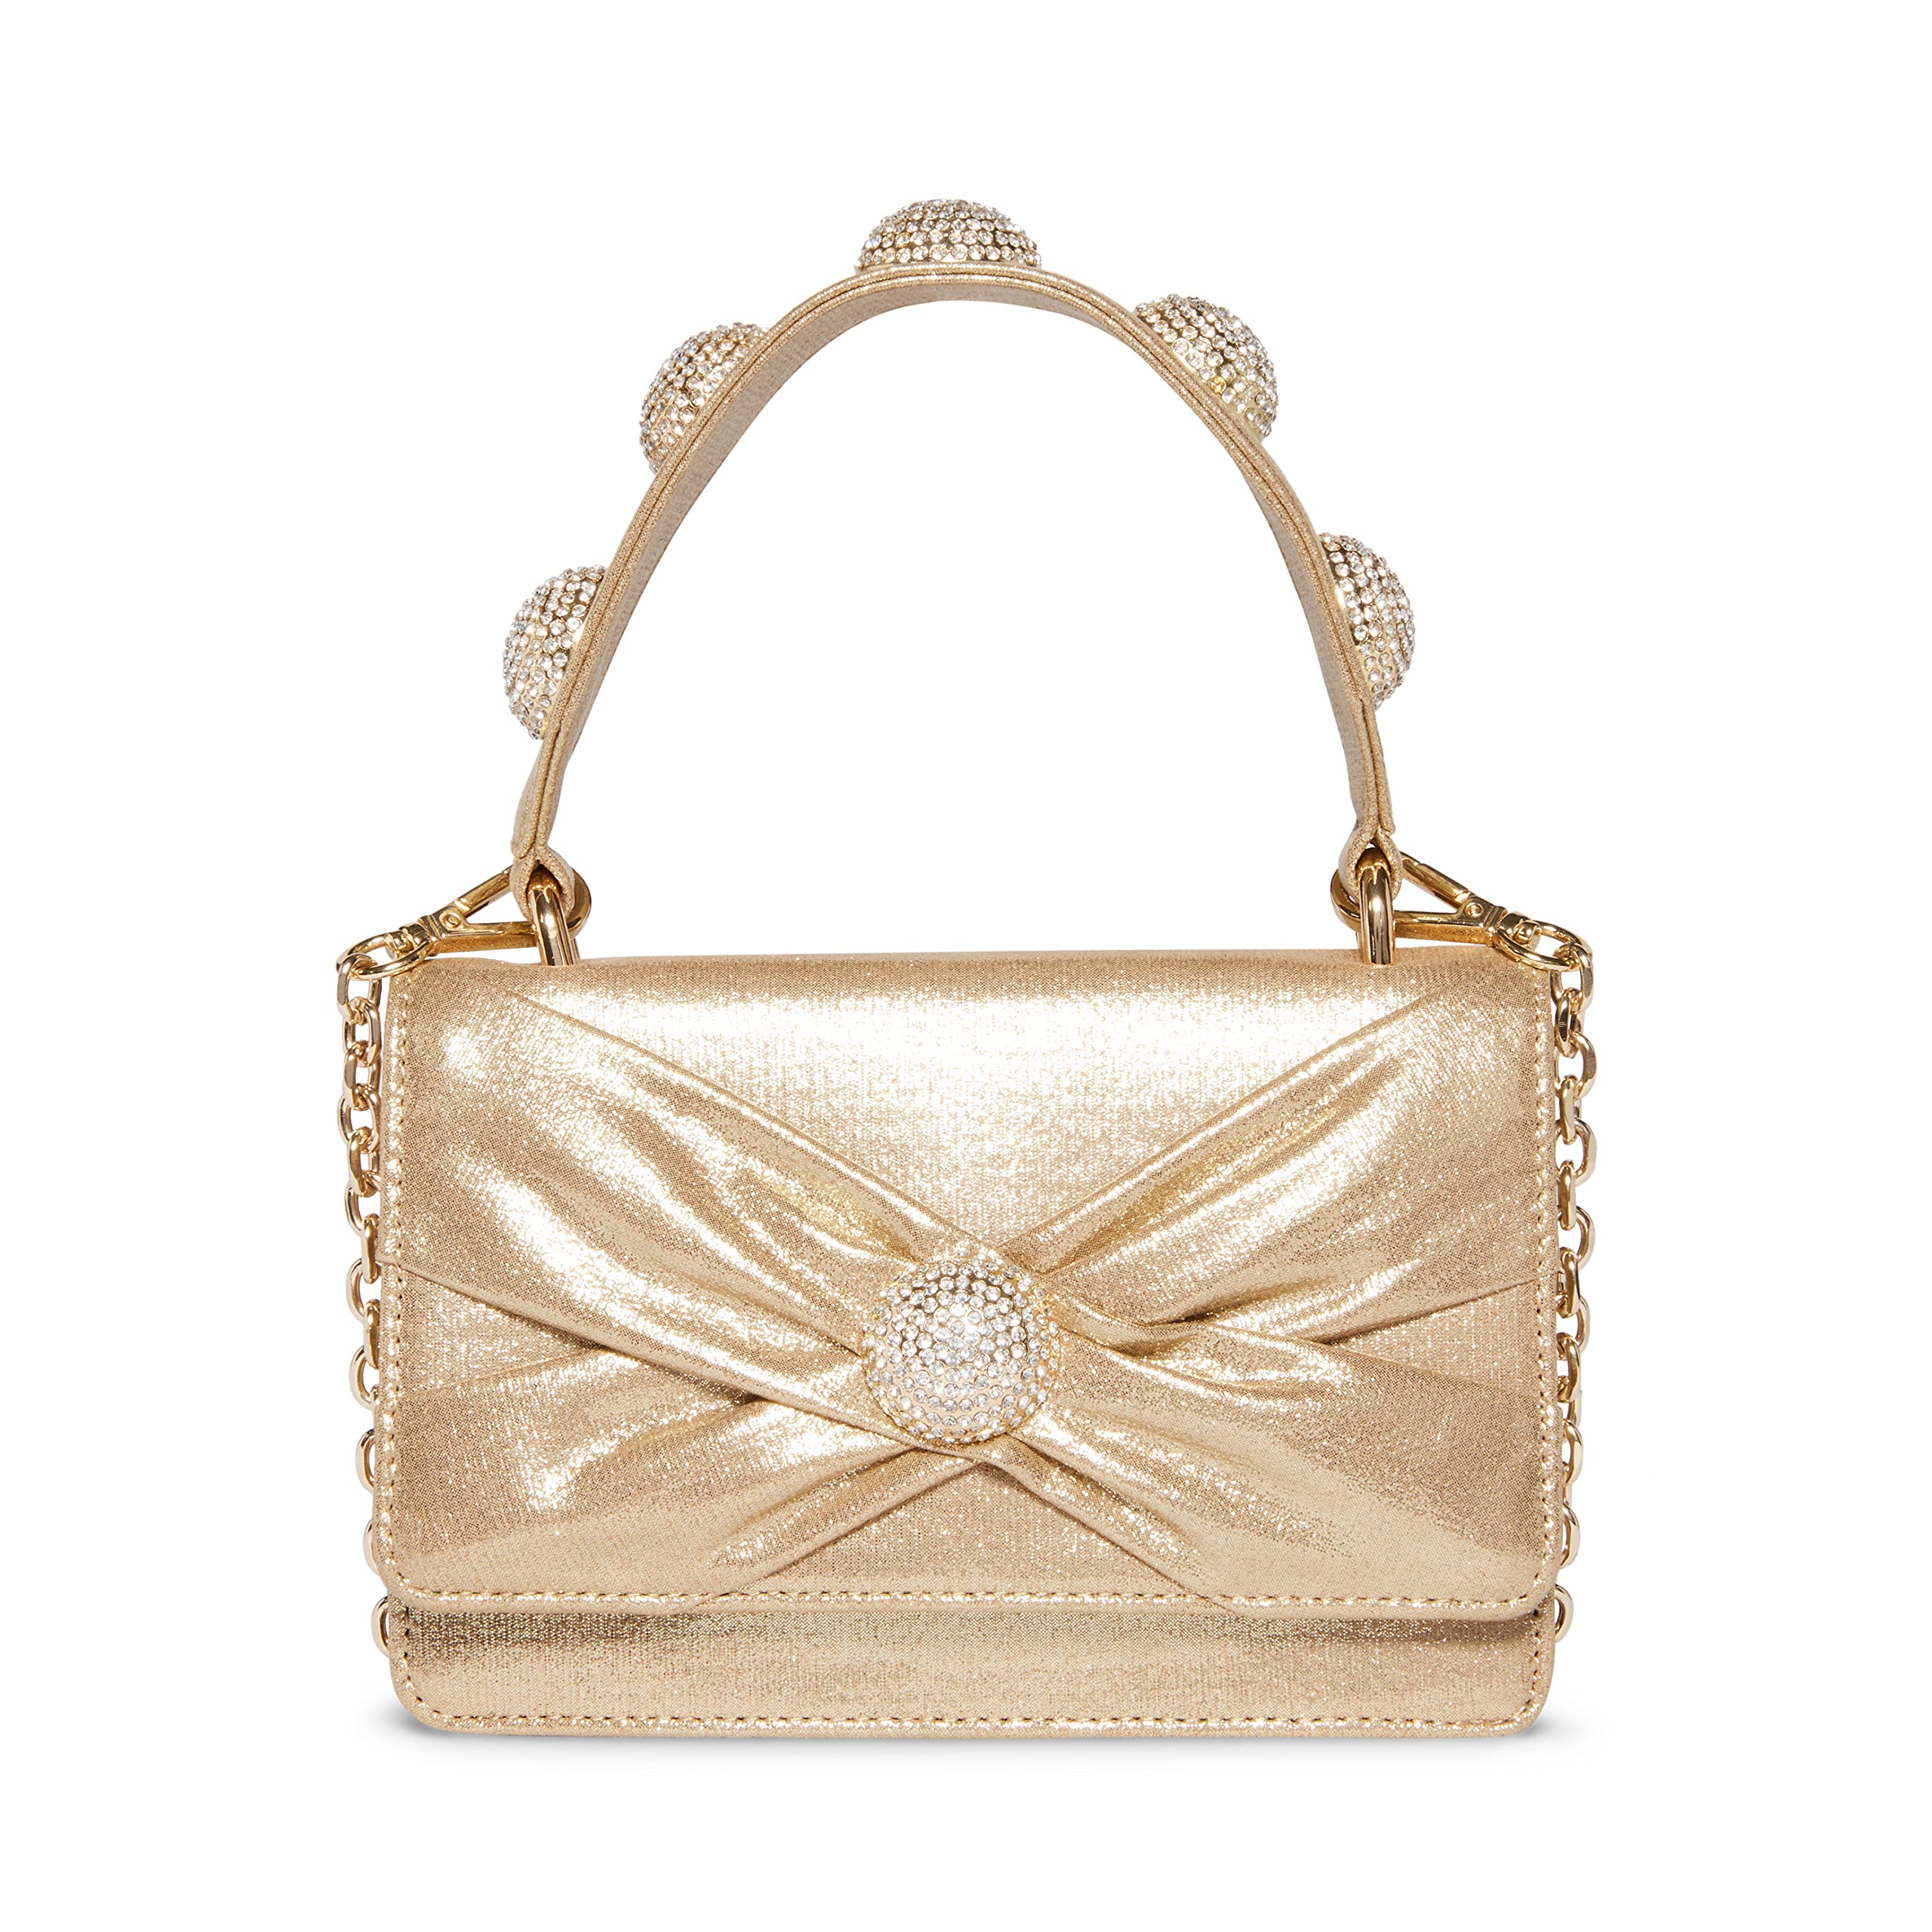 Betsey Johnson X Marks The Spot Top Handle Bag